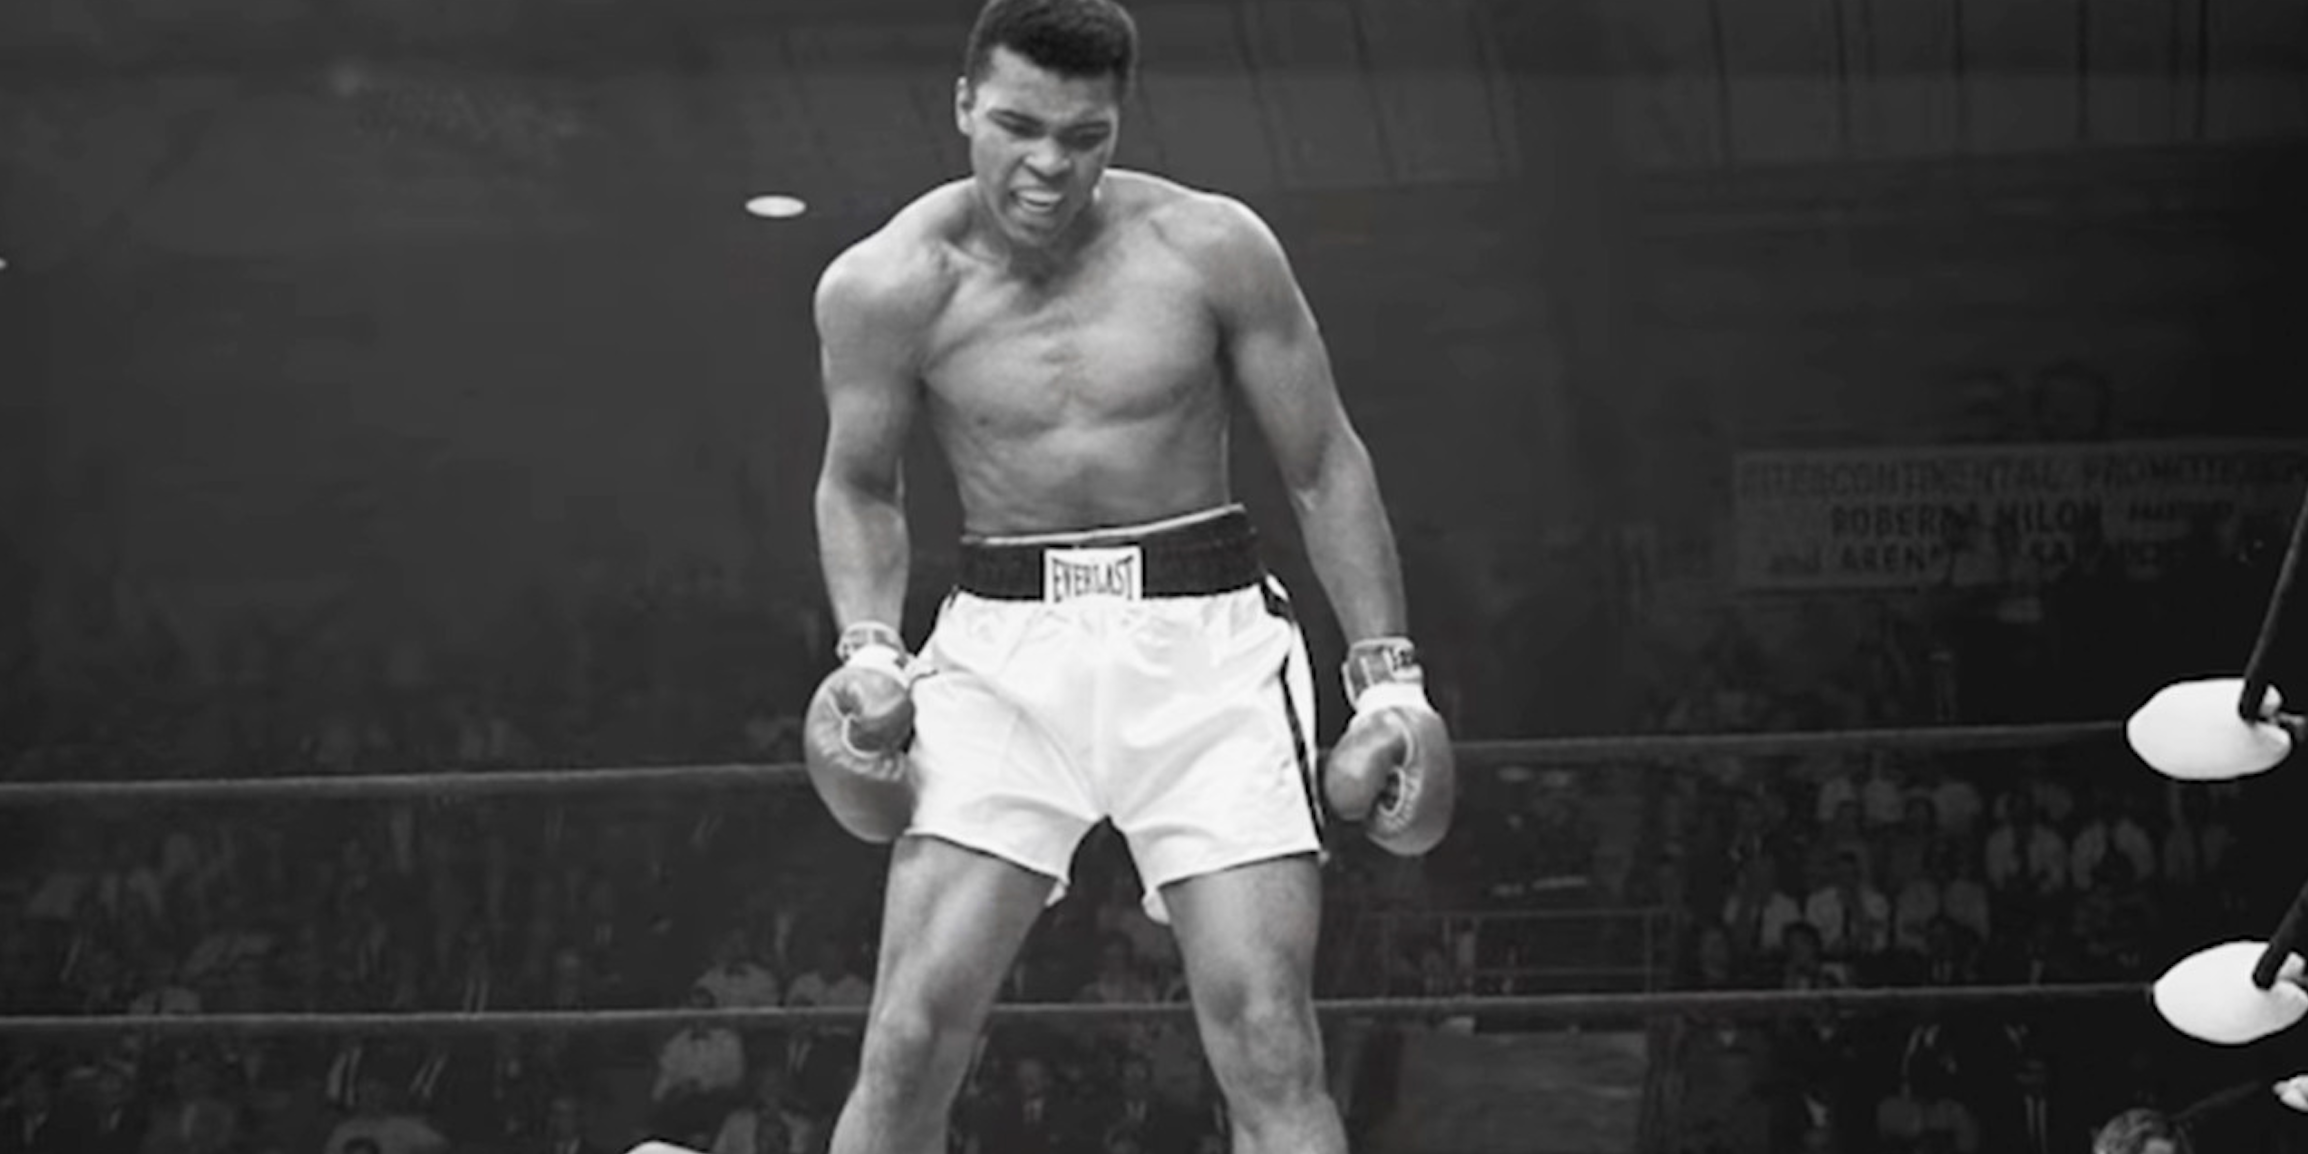 HBO's What's My Name Muhammad Ali